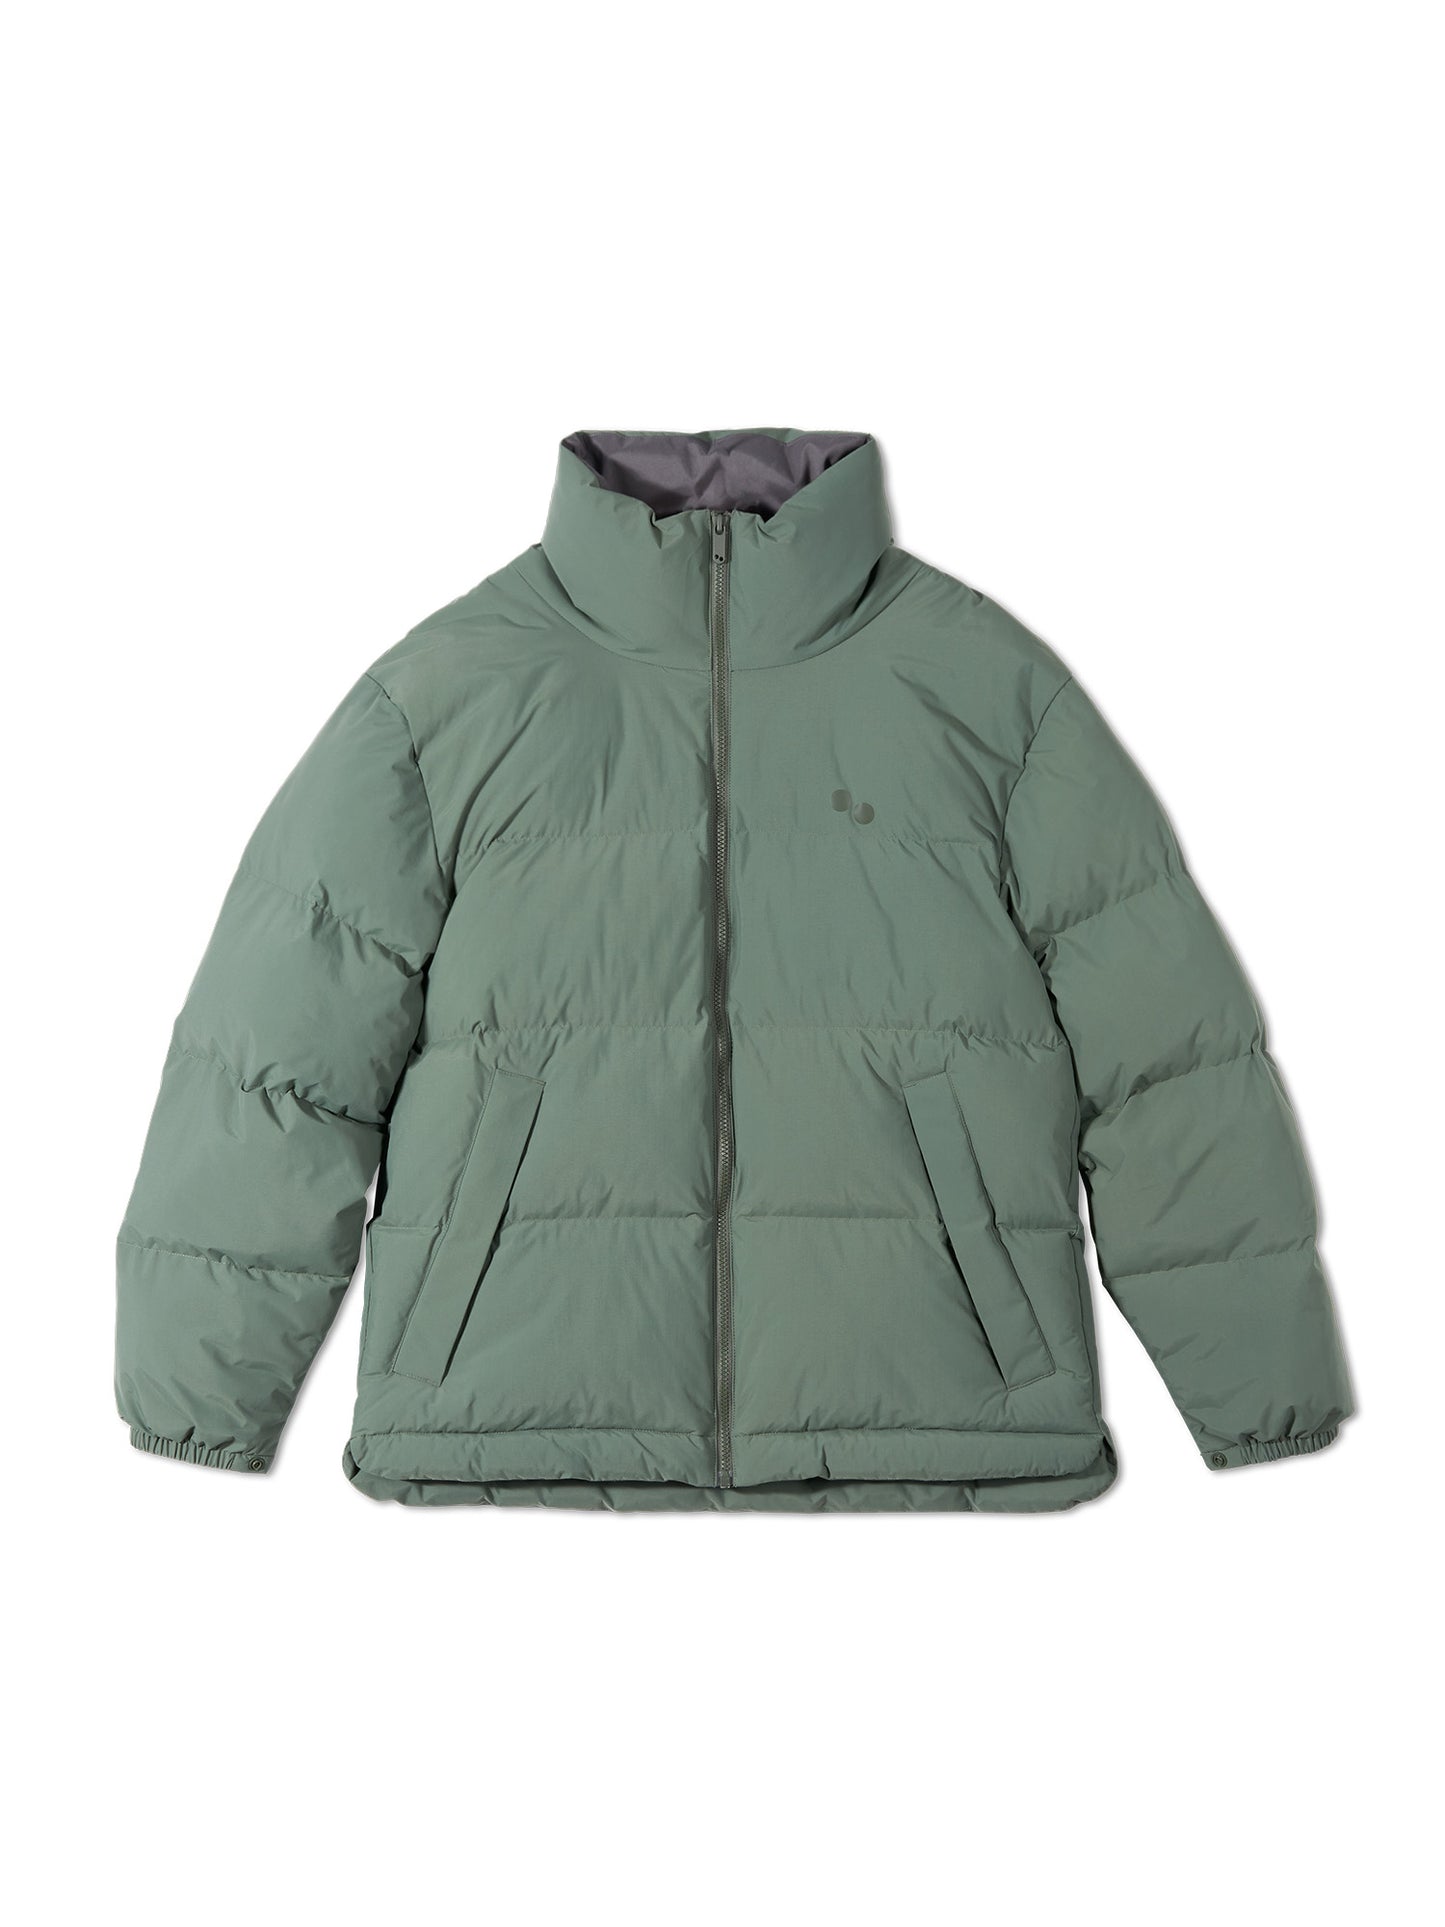 pinqponq-Puffer-Jacket-Unisex-Forester-Olive-front